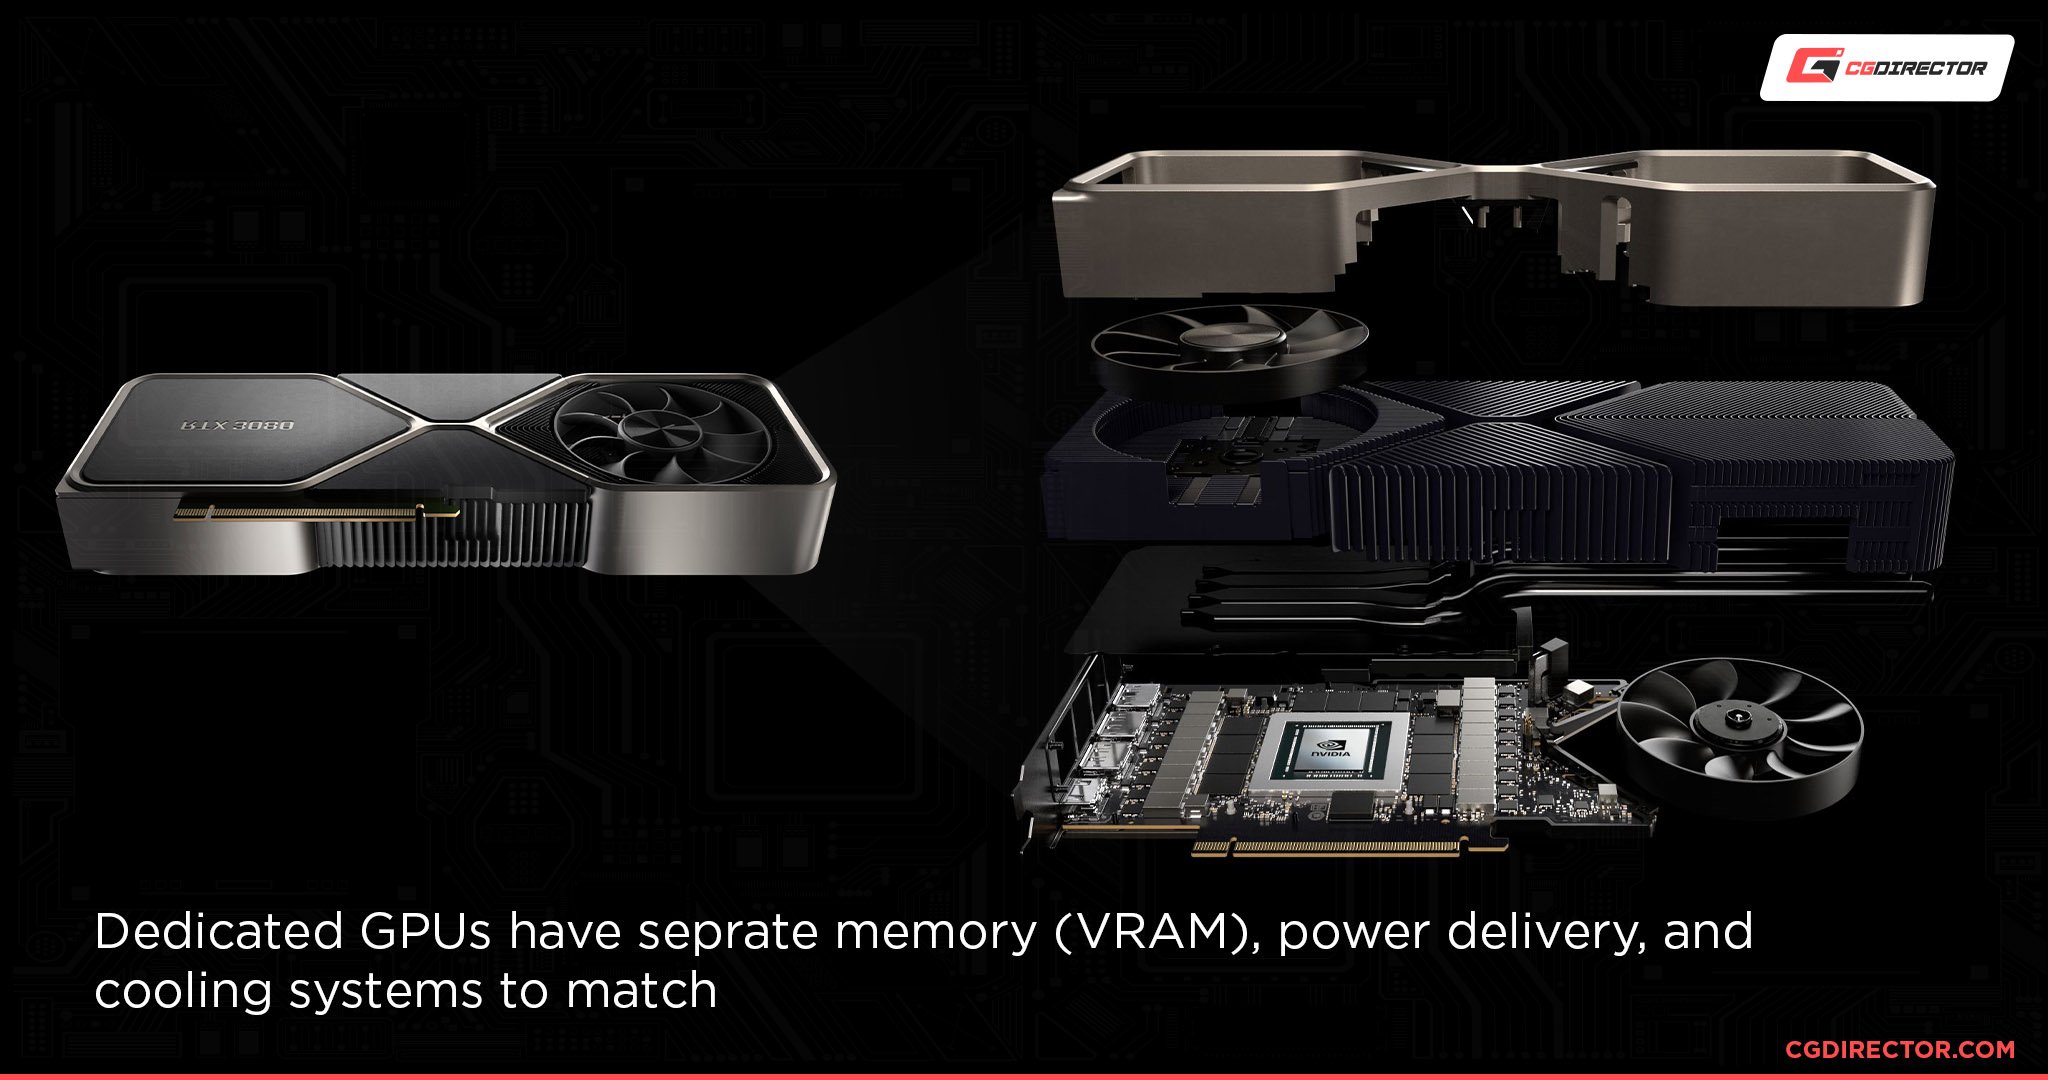 What are Dedicated GPUs